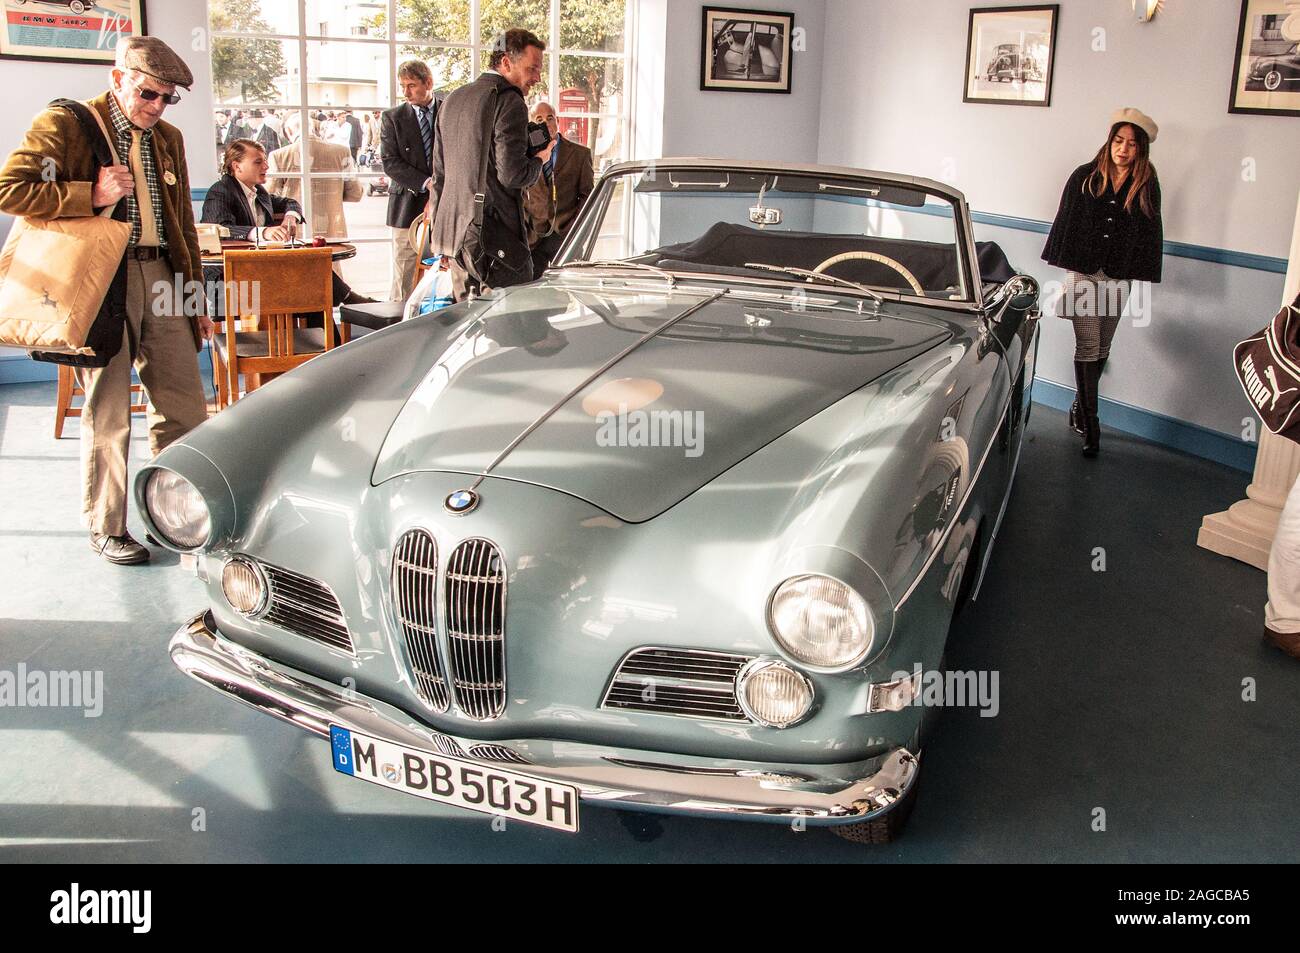 BMW car showroom at the Goodwood Revival vintage event in West Sussex, UK. Vintage, classic BMW 503 in a retro car sales scenario. Auto sales Stock Photo